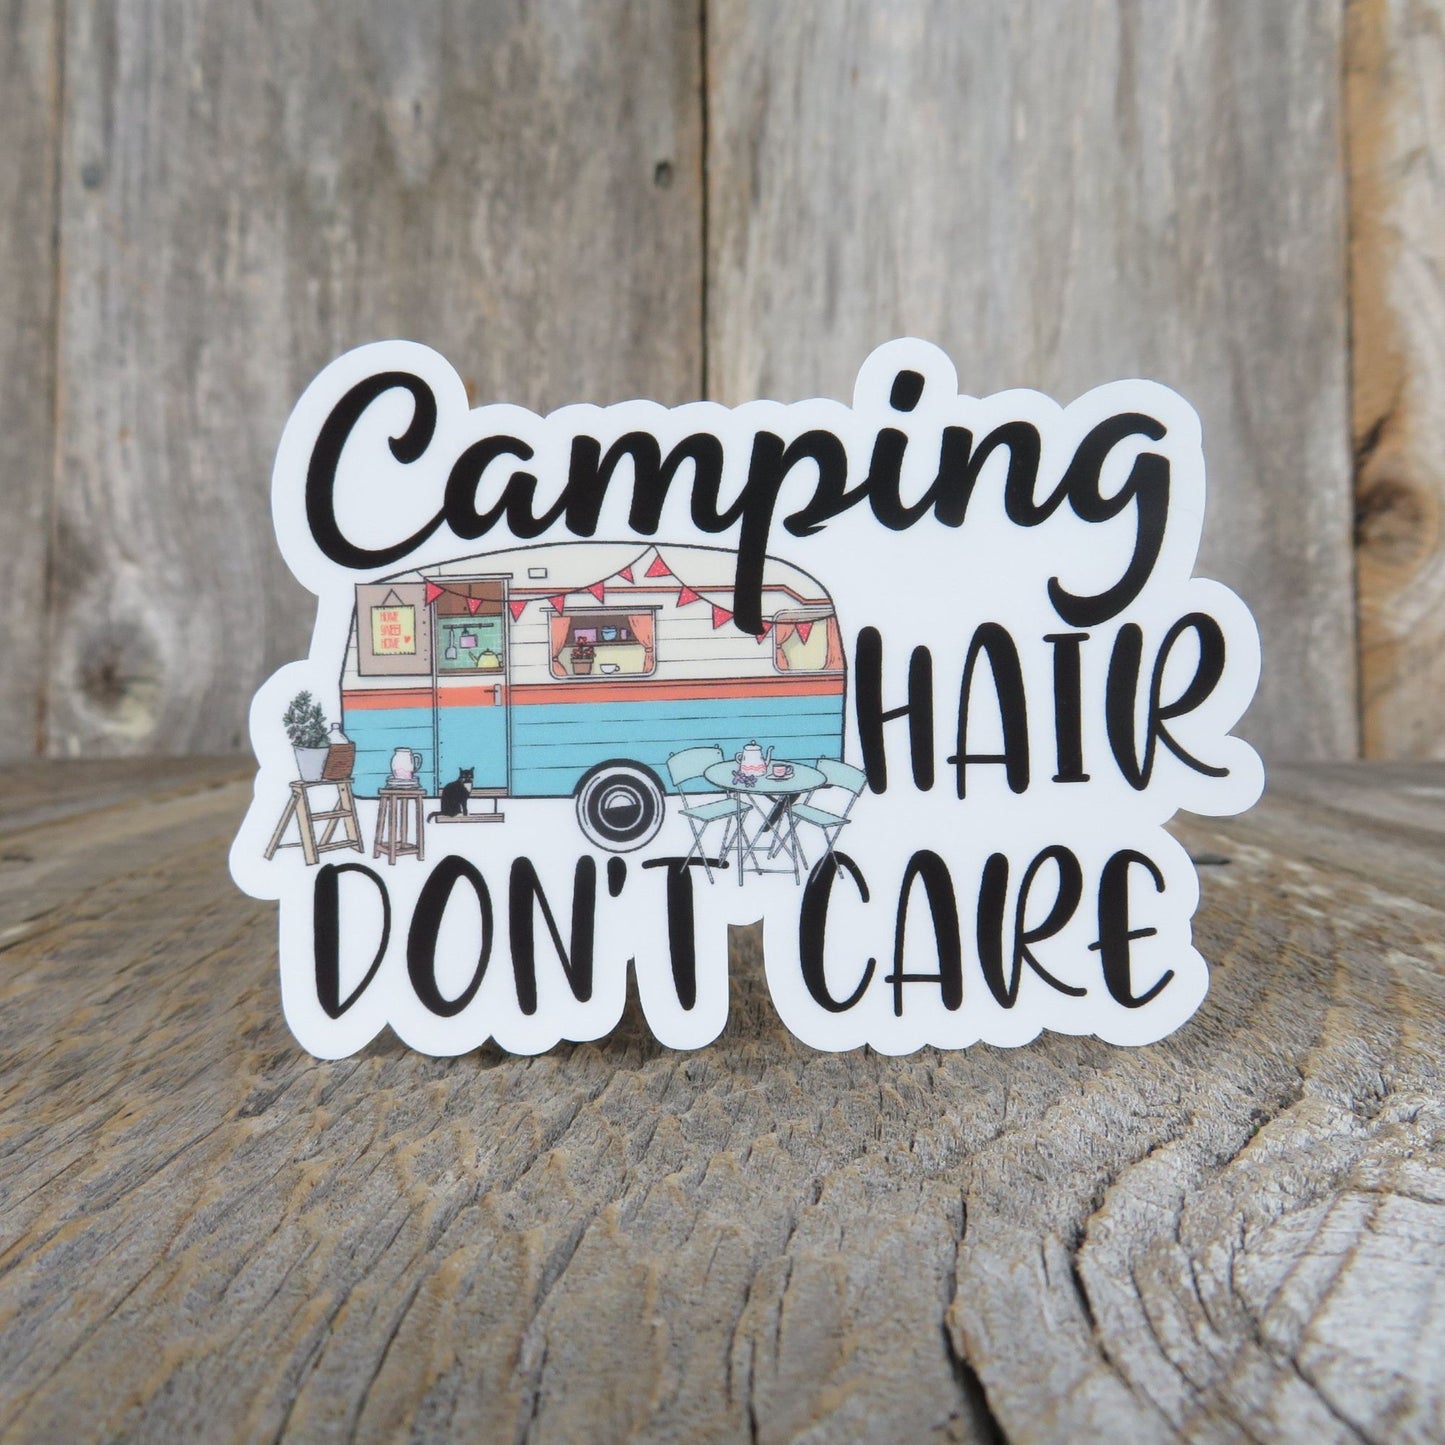 Camping Hair Don't Care Sticker Waterproof Travel Trailer Sticker Messy Bun Mountains Woods Outdoors Retro Colors